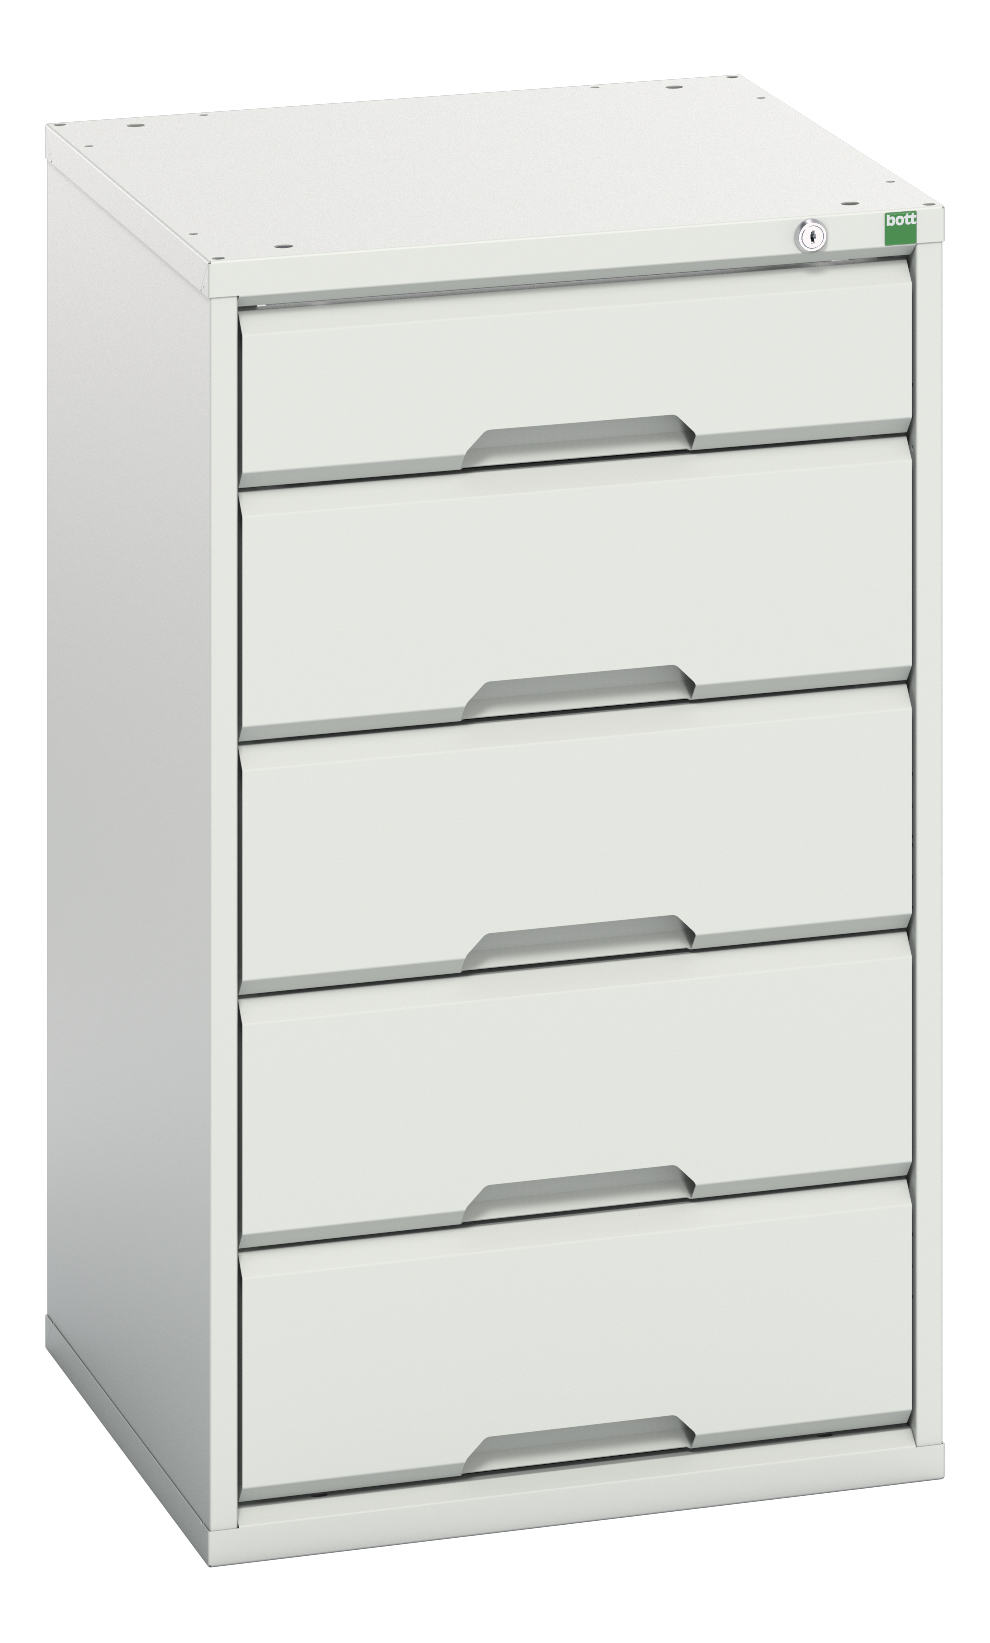 Bott Verso Drawer Cabinet With 5 Drawers - 16925017.16